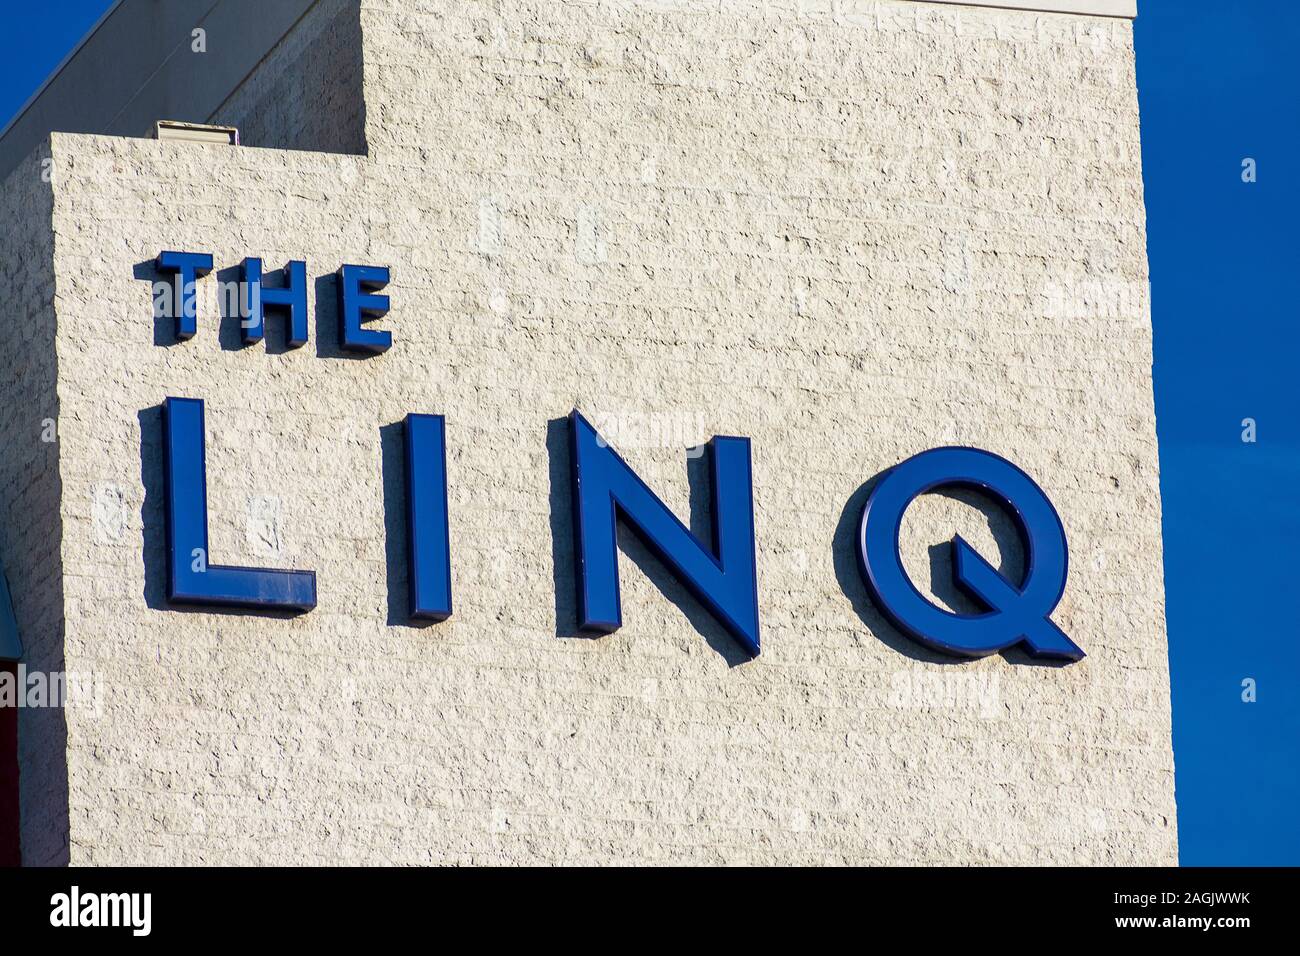 The LINQ hotel and casino resort sign as seen from Las Vegas Strip - Las Vegas, Nevada, USA - December, 2019 Stock Photo